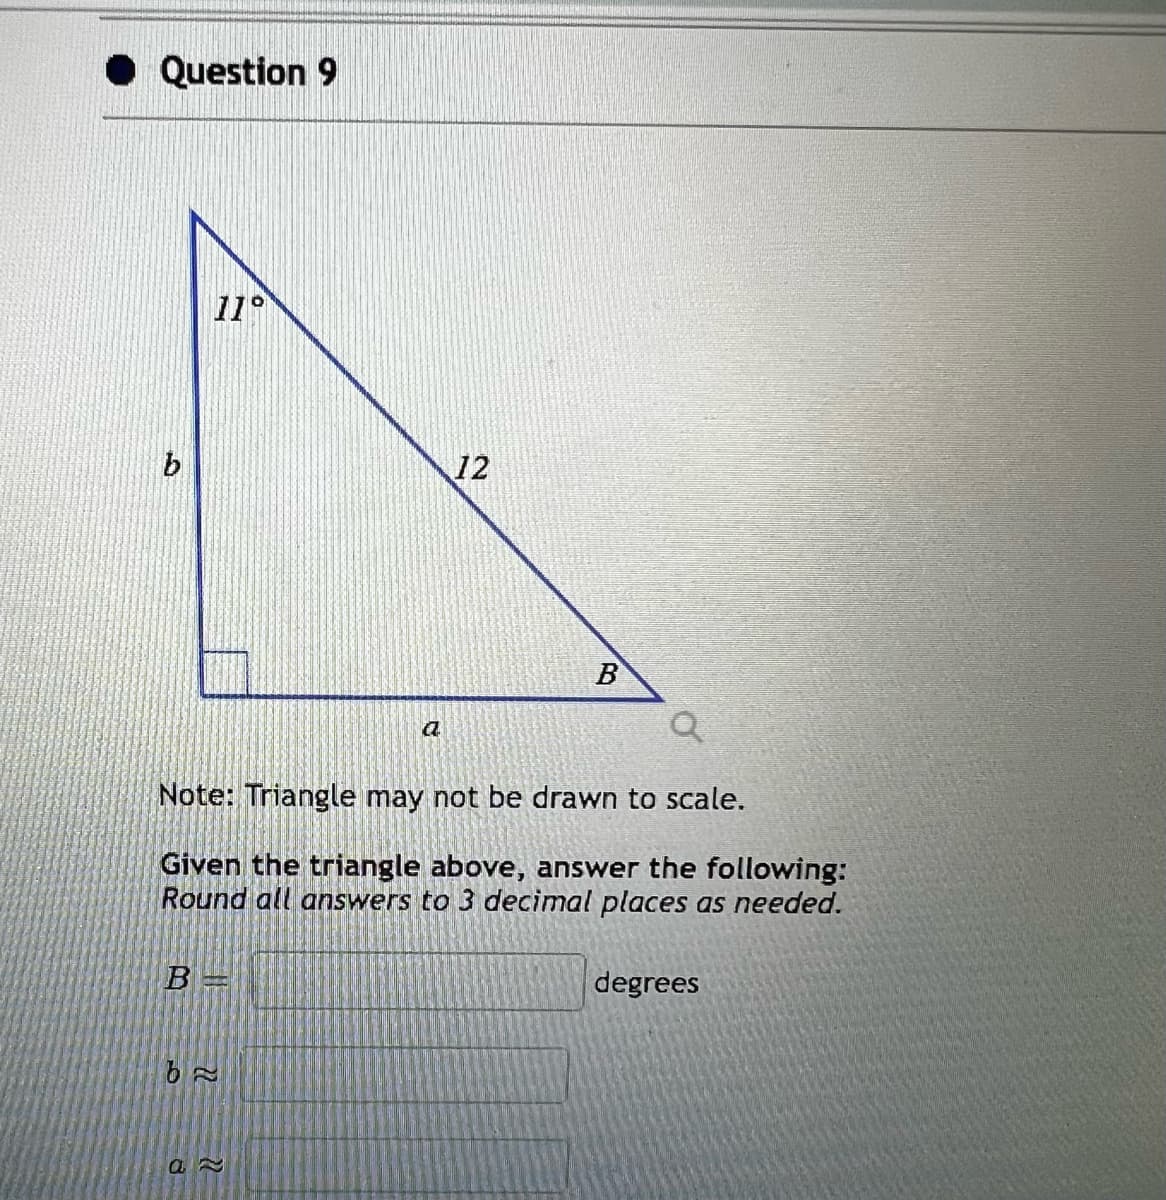 ◆ Question 9
b
11°
B=
62
a
Note: Triangle may not be drawn to scale.
Given the triangle above, answer the following:
Round all answers to 3 decimal places as needed.
AB
12
a
B
degrees